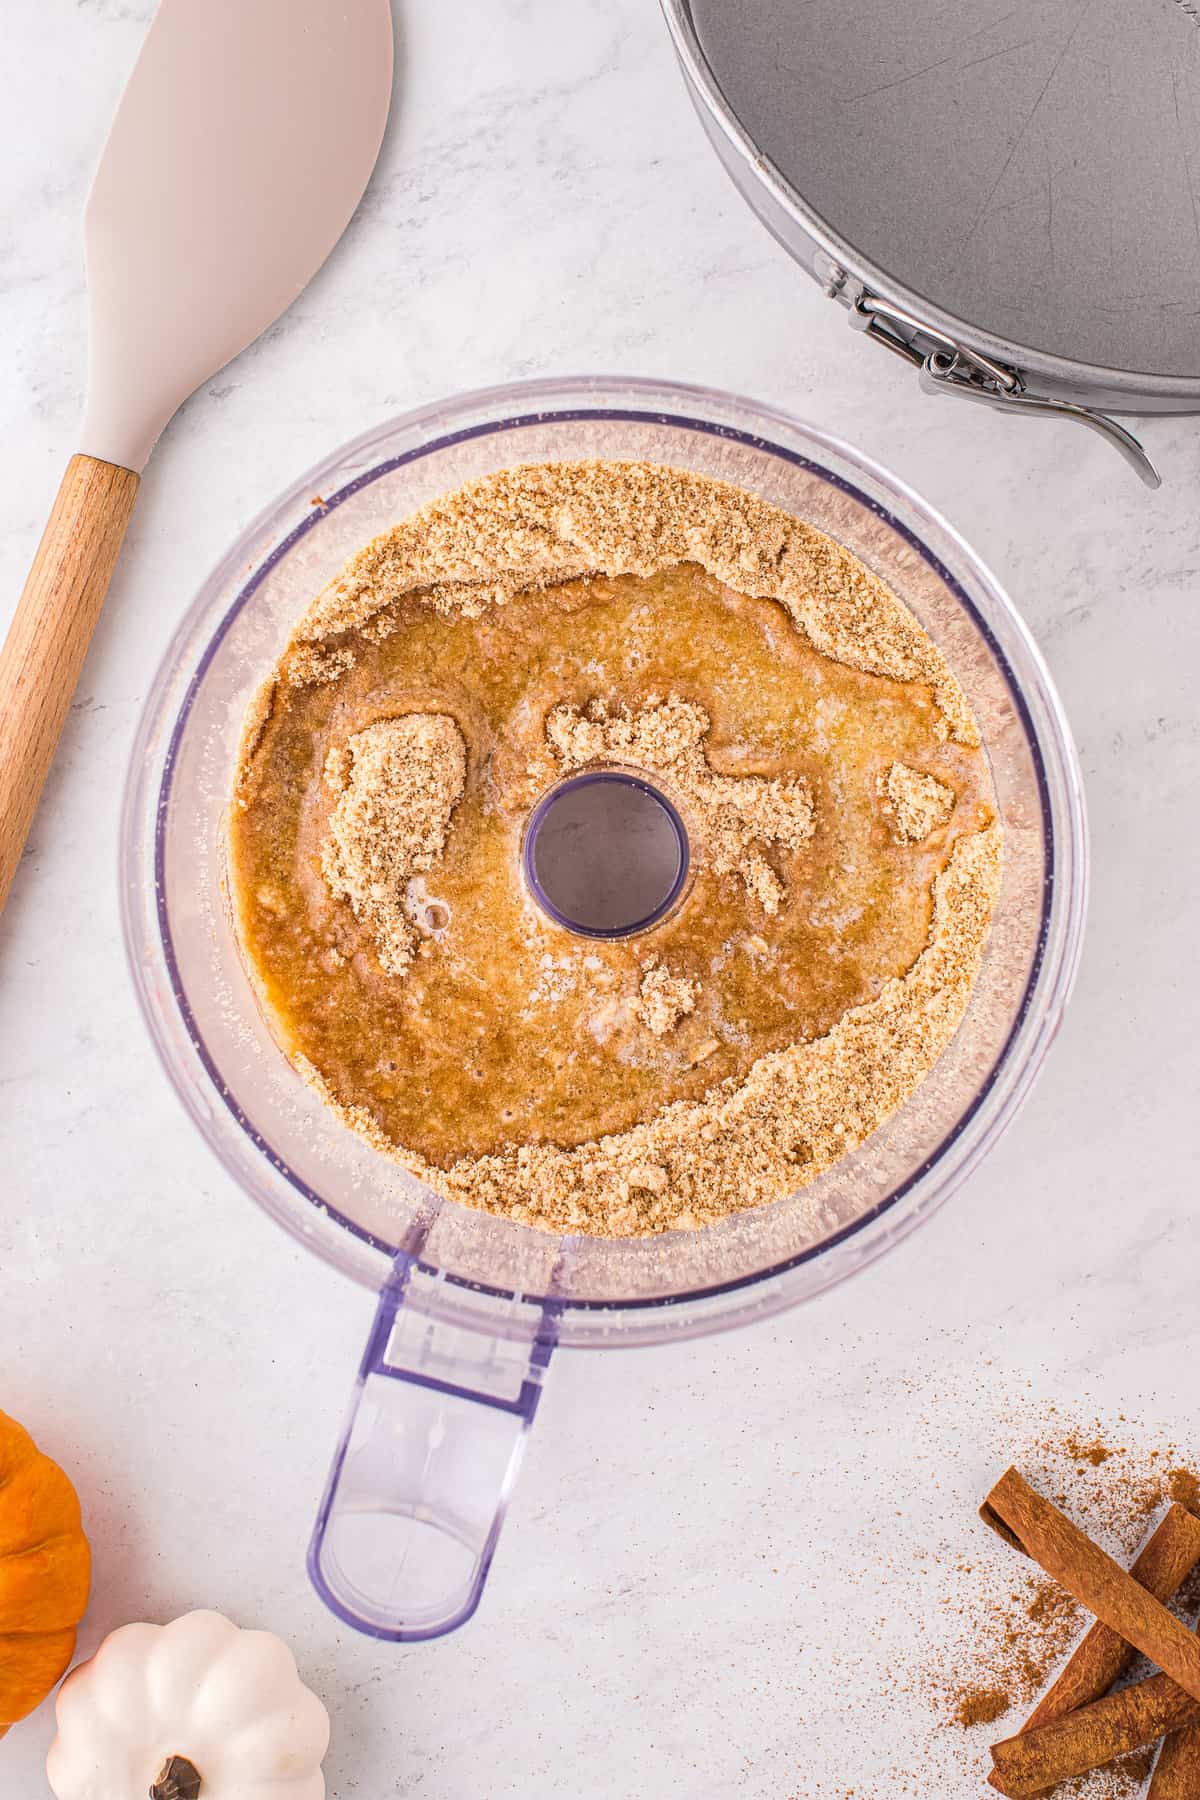 Melted butter and wafer crumbs in food processor